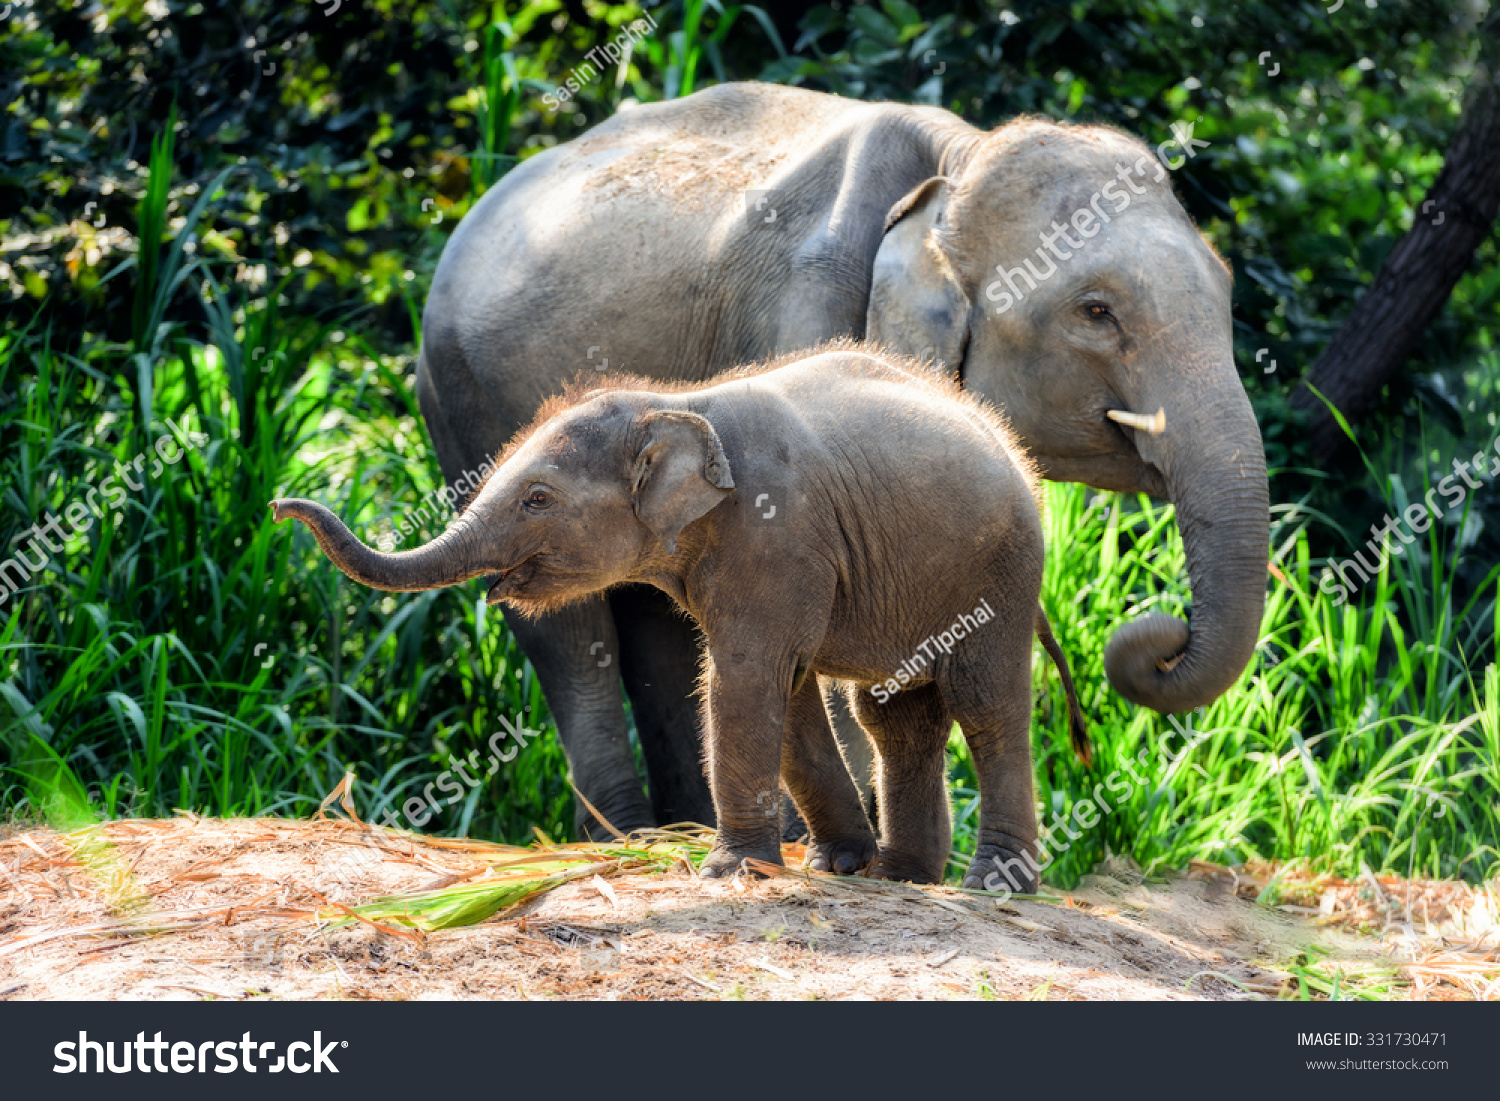 Mother elephant with baby #331730471